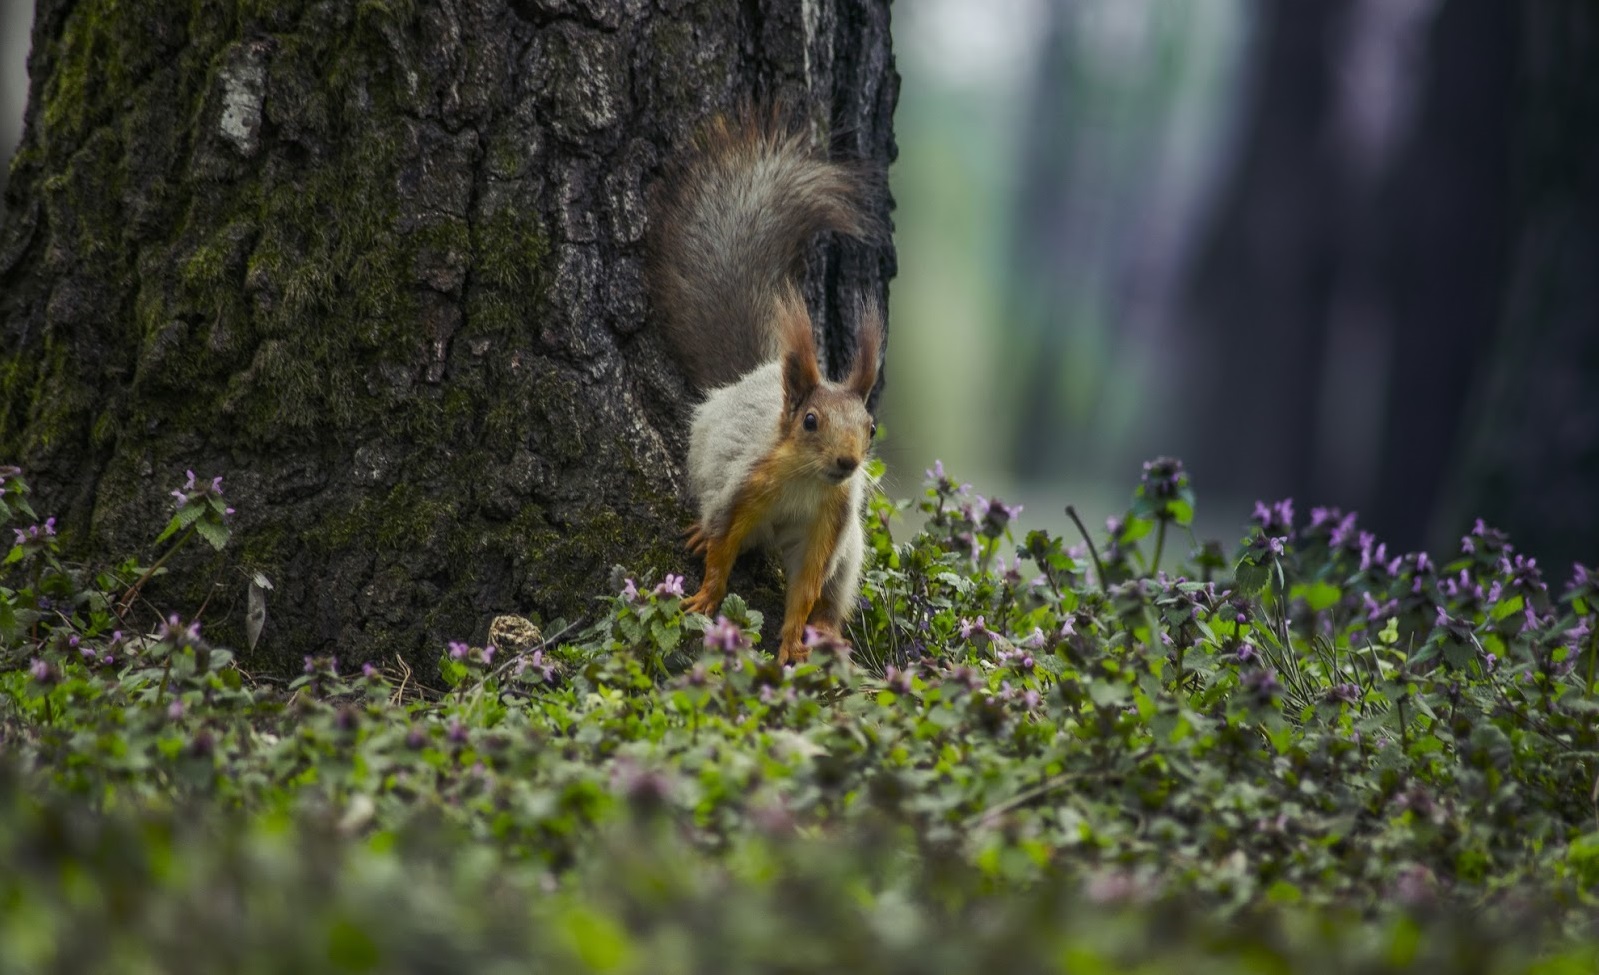 Photo of a squirrel in the forest